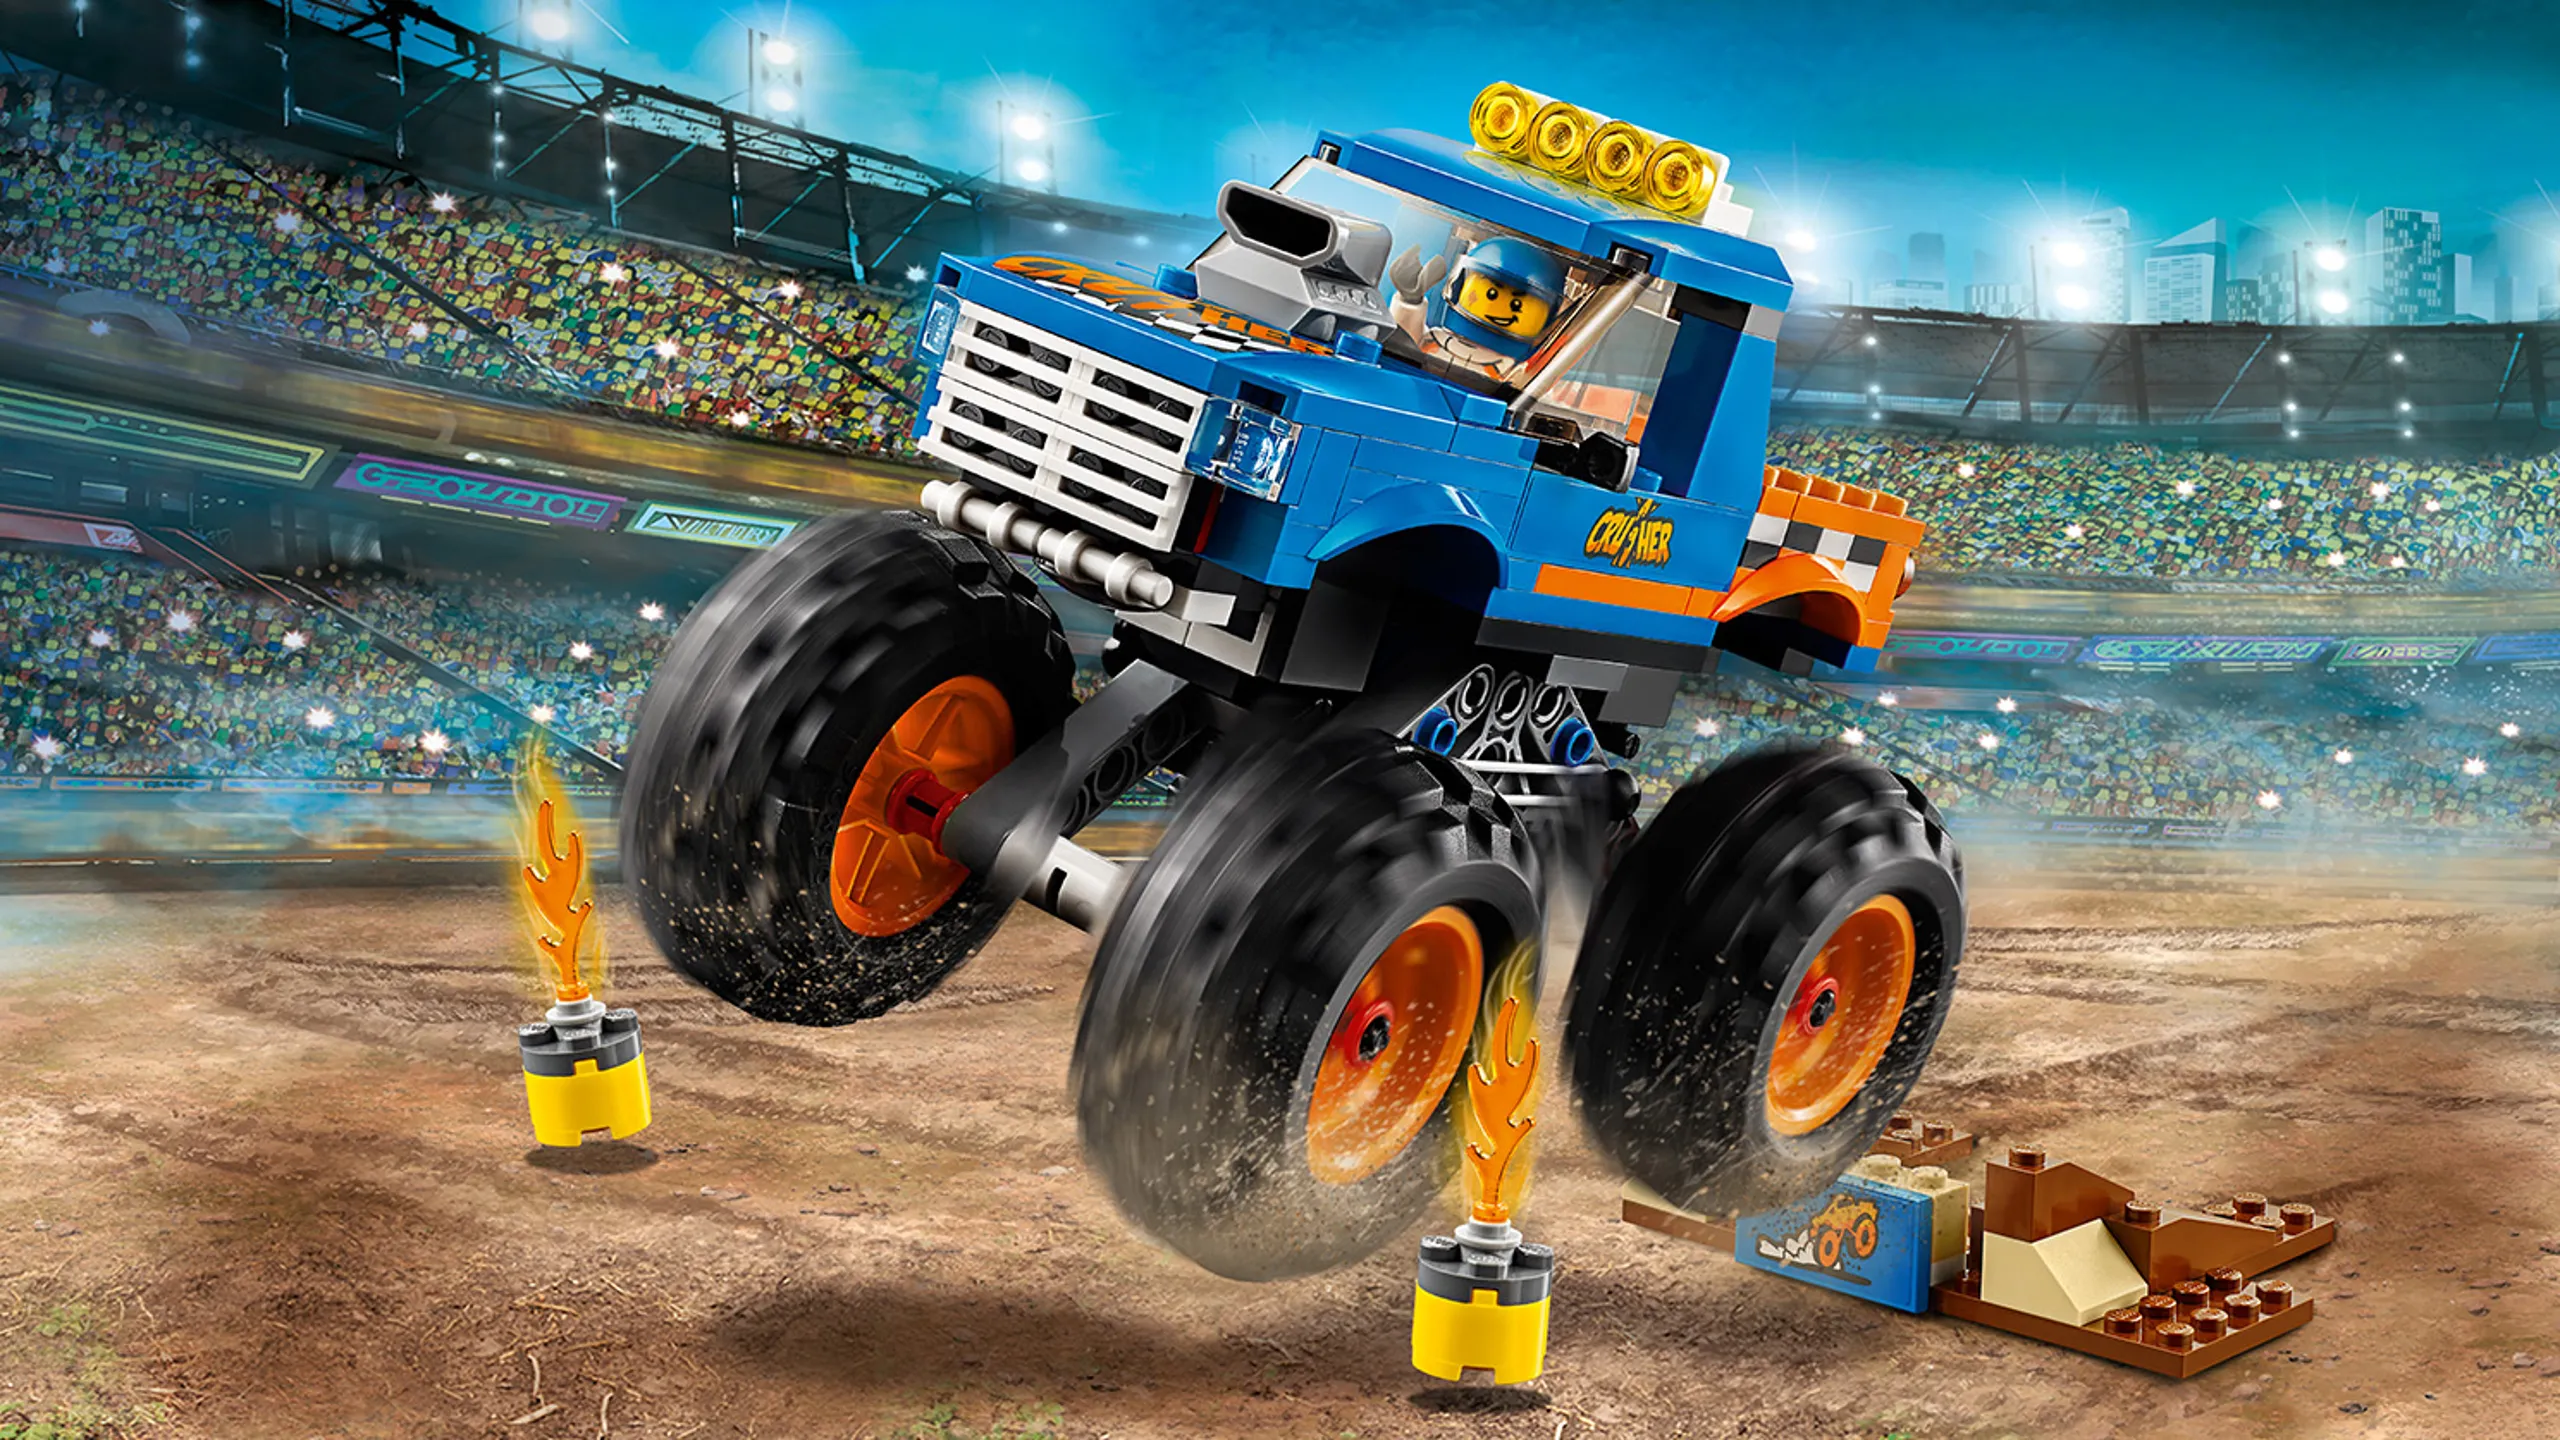 LEGO City Great Vehicles - 60180 Monster Truck - the monster truck drives at a show in an arena.